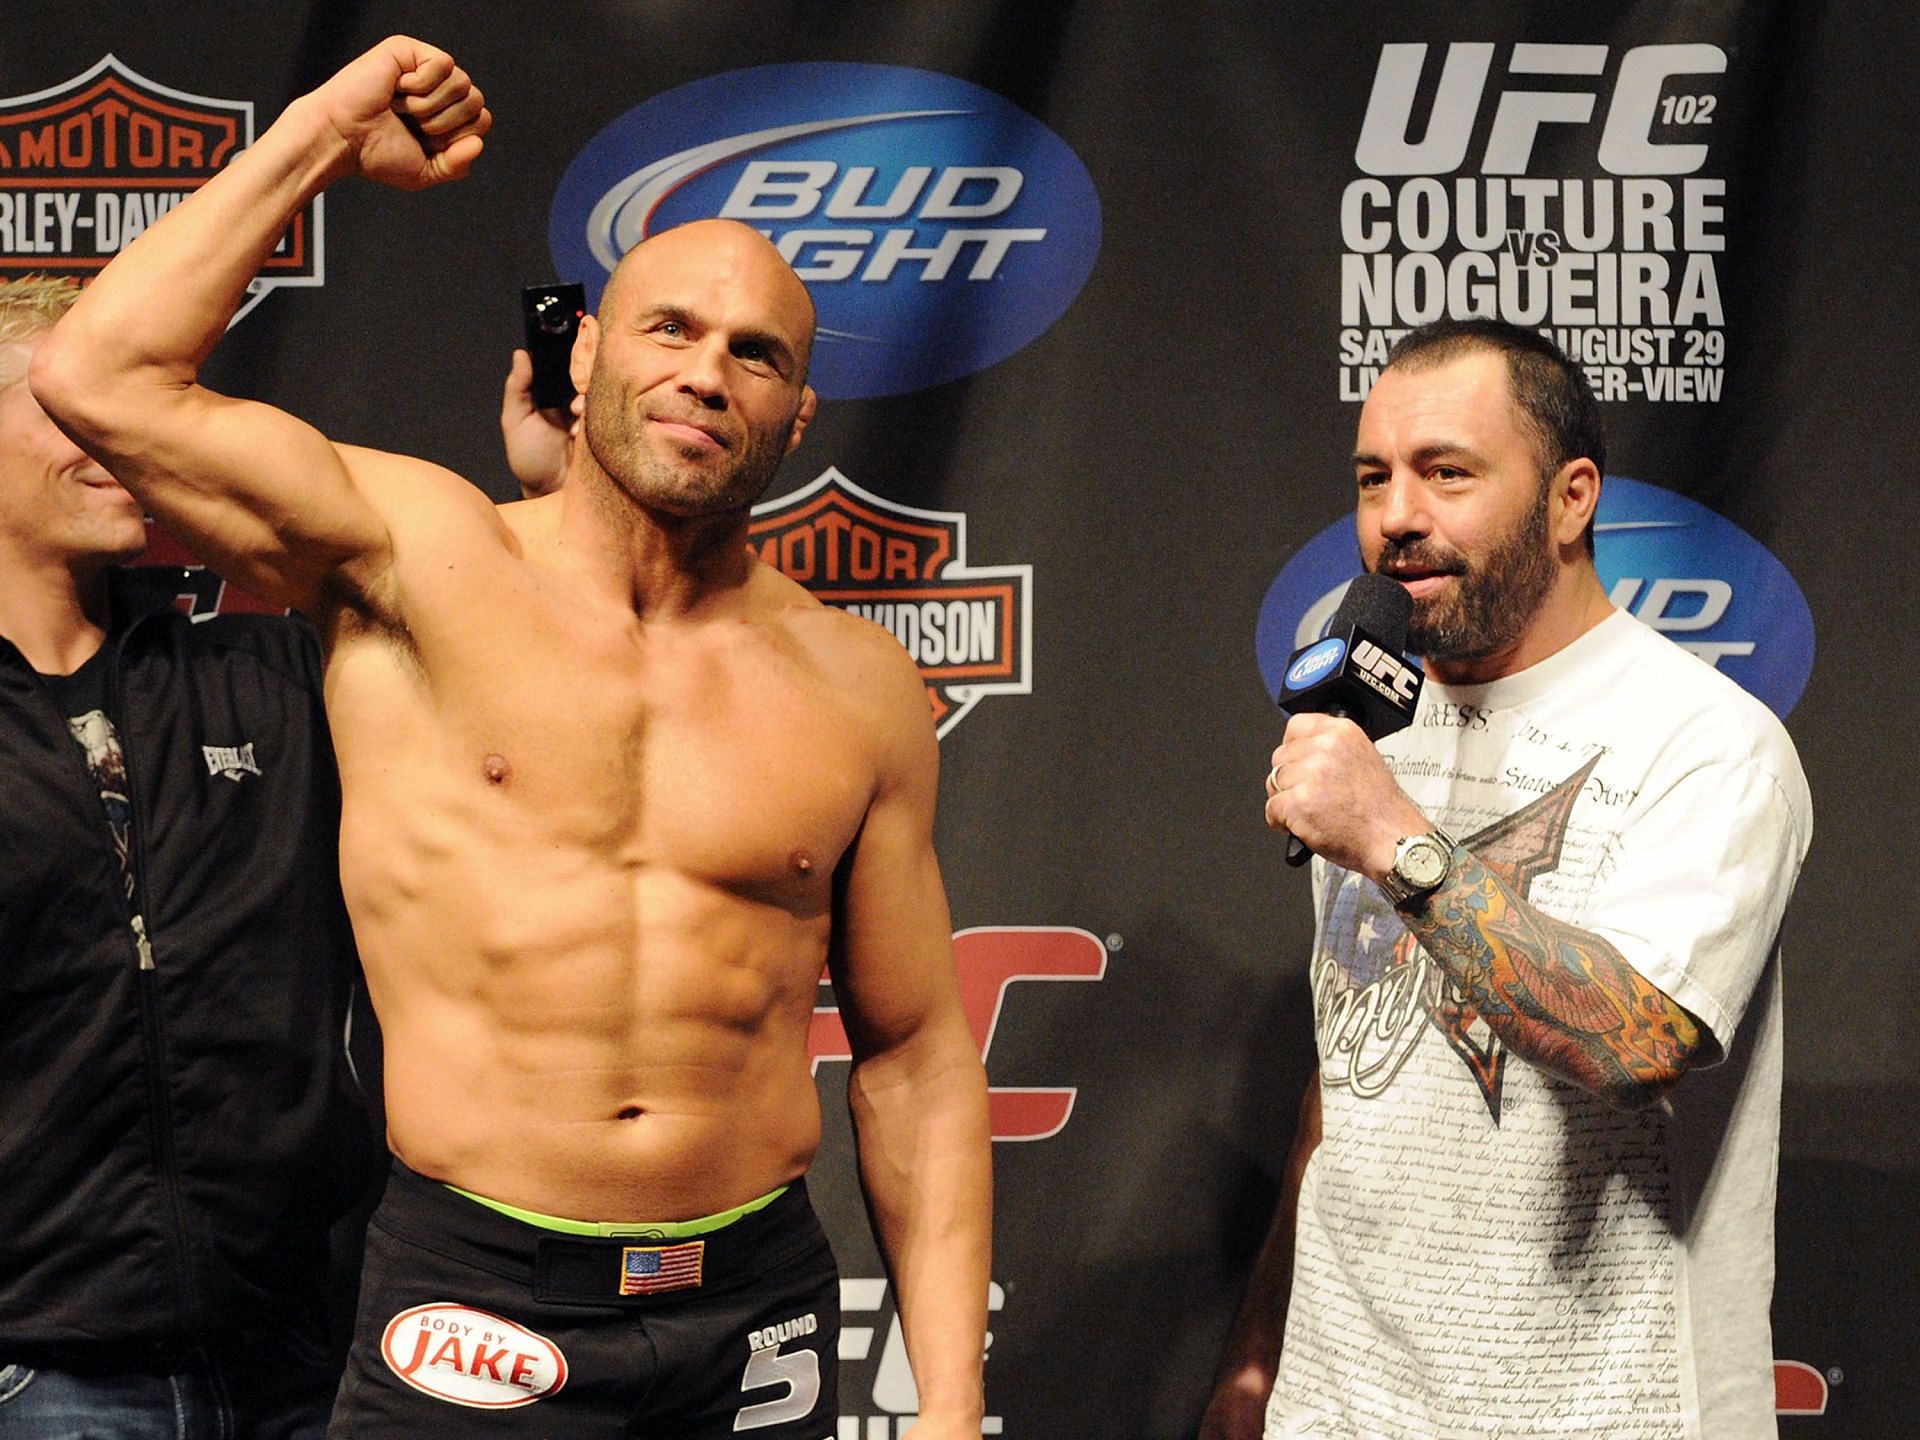 Randy Couture pulled off one of his greatest-ever wins in his rematch with Pedro Rizzo